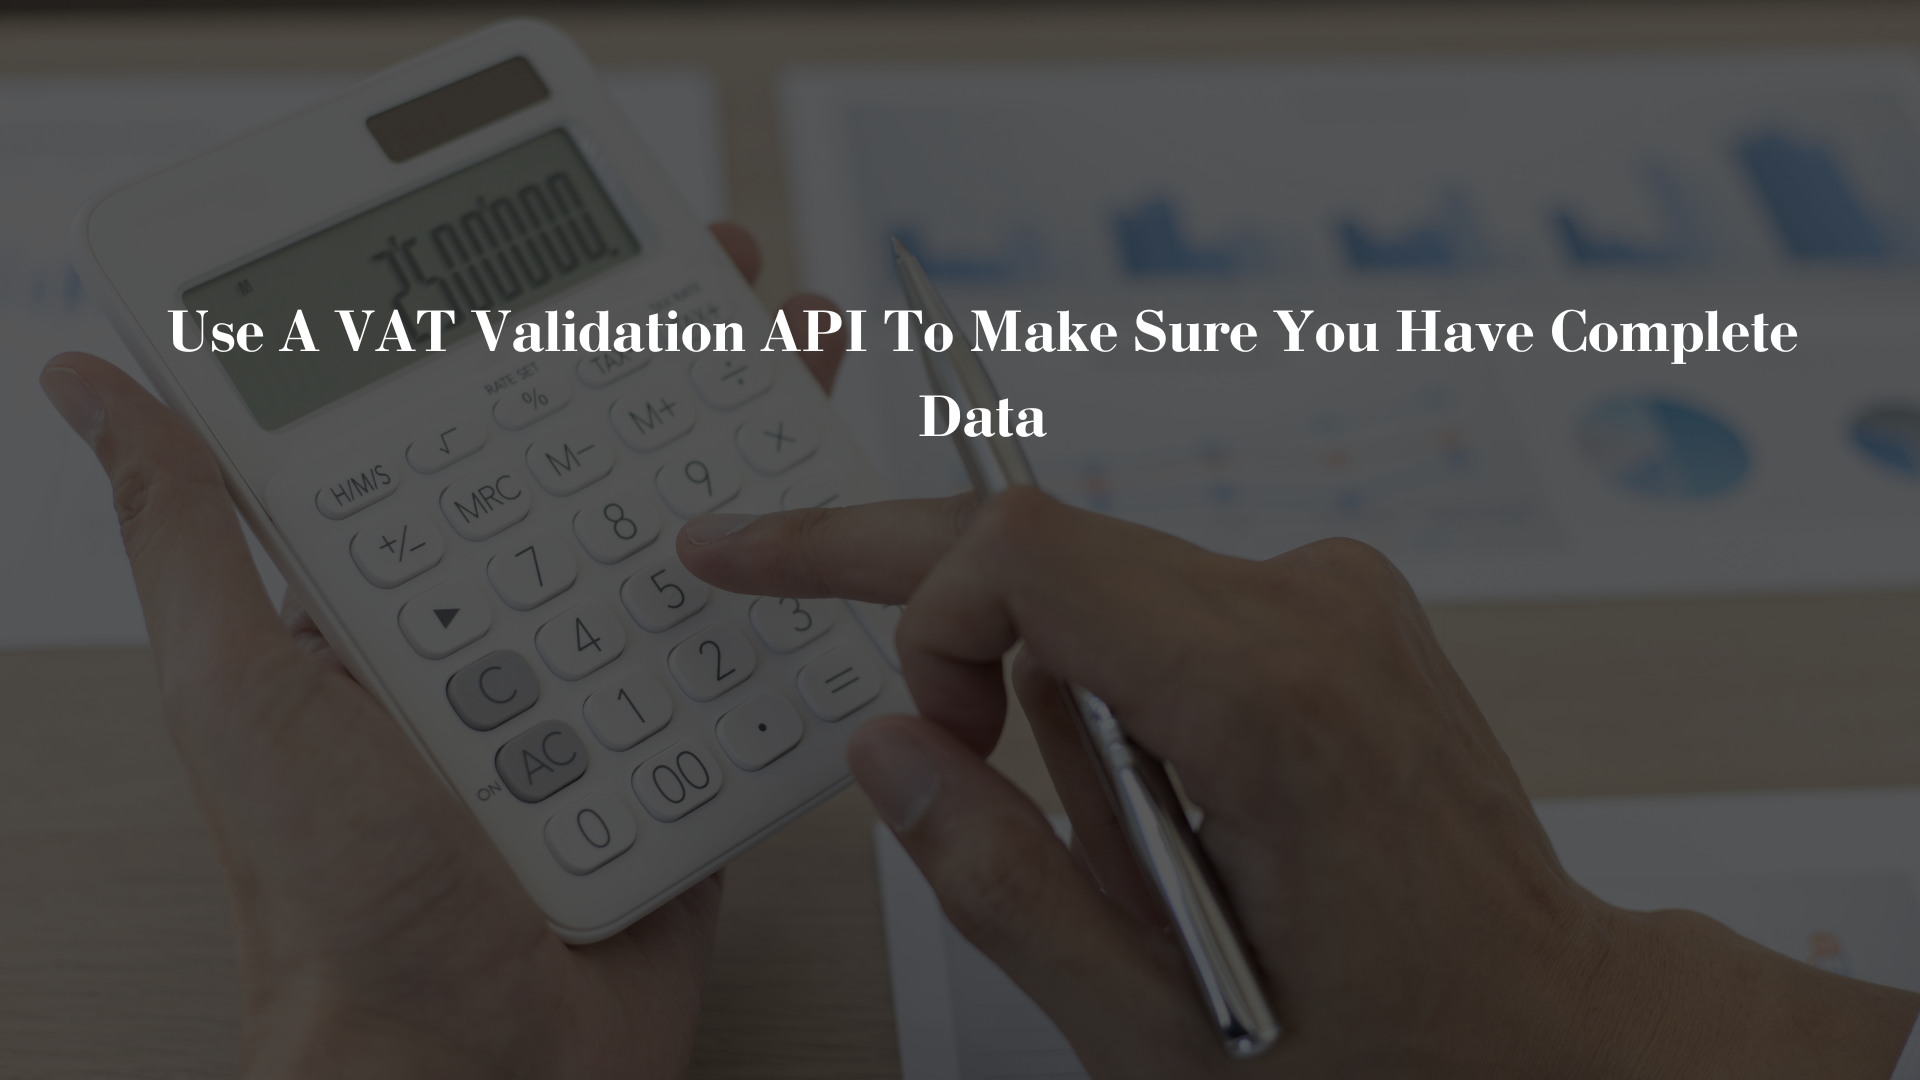 Use A VAT Validation API To Make Sure You Have Complete Data